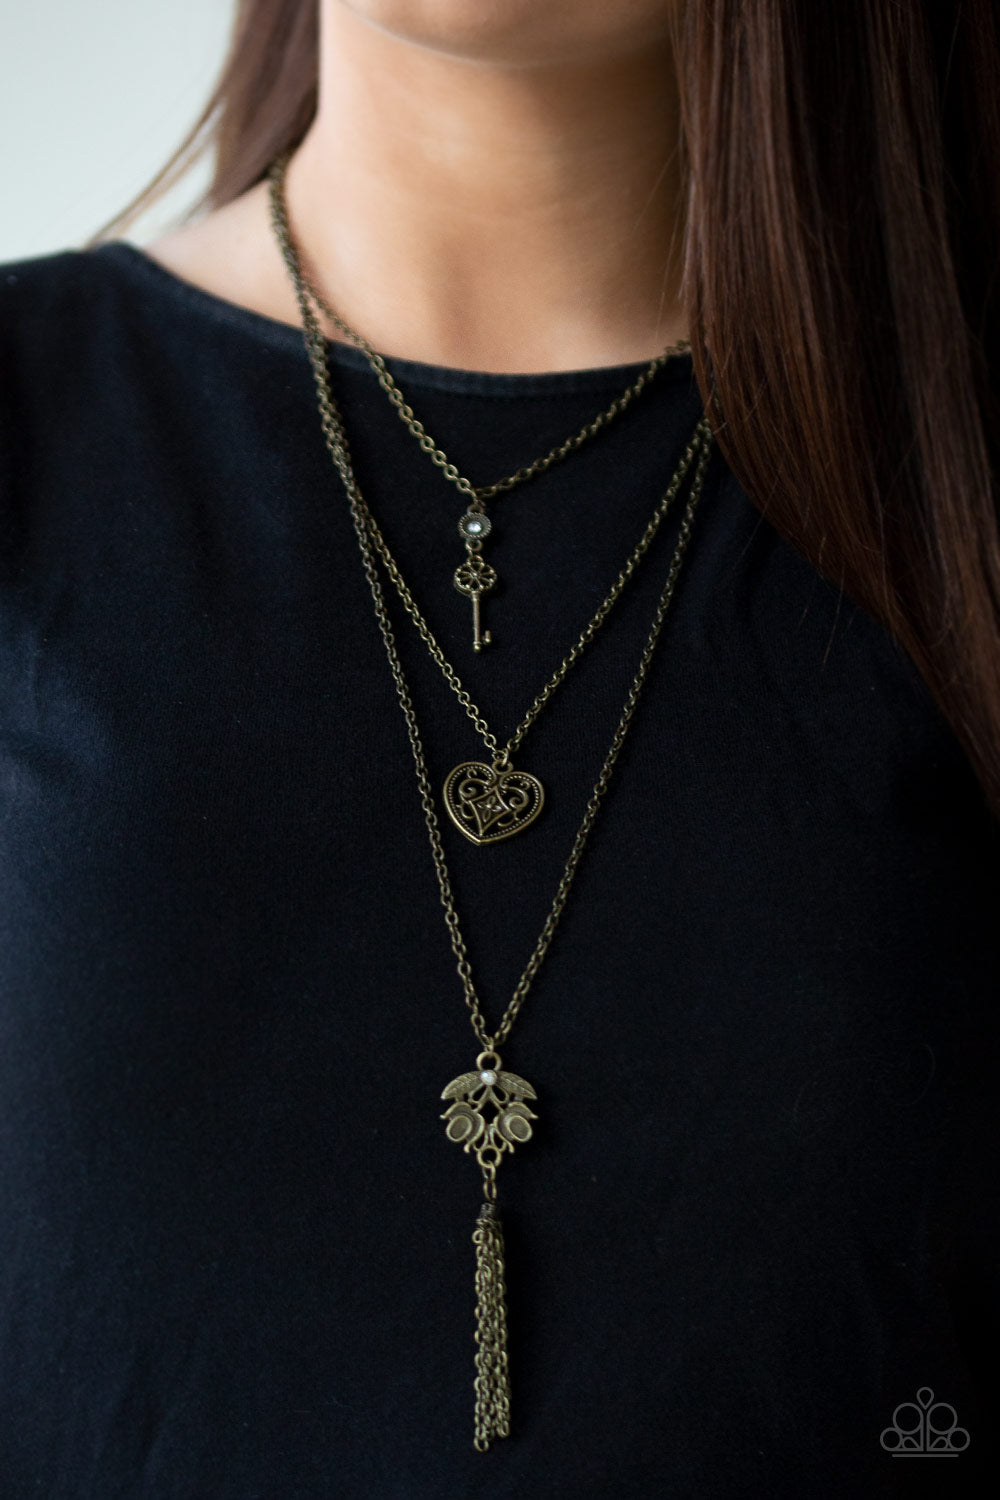 Paparazzi Necklace - A shimmery brass key, heart-like frame, and leafy brass pendant layer down the chest in a whimsical fashion. Infused with a playful tassel, glittery white rhinestones adorn the upper and lowermost frames for a sparkling finish.